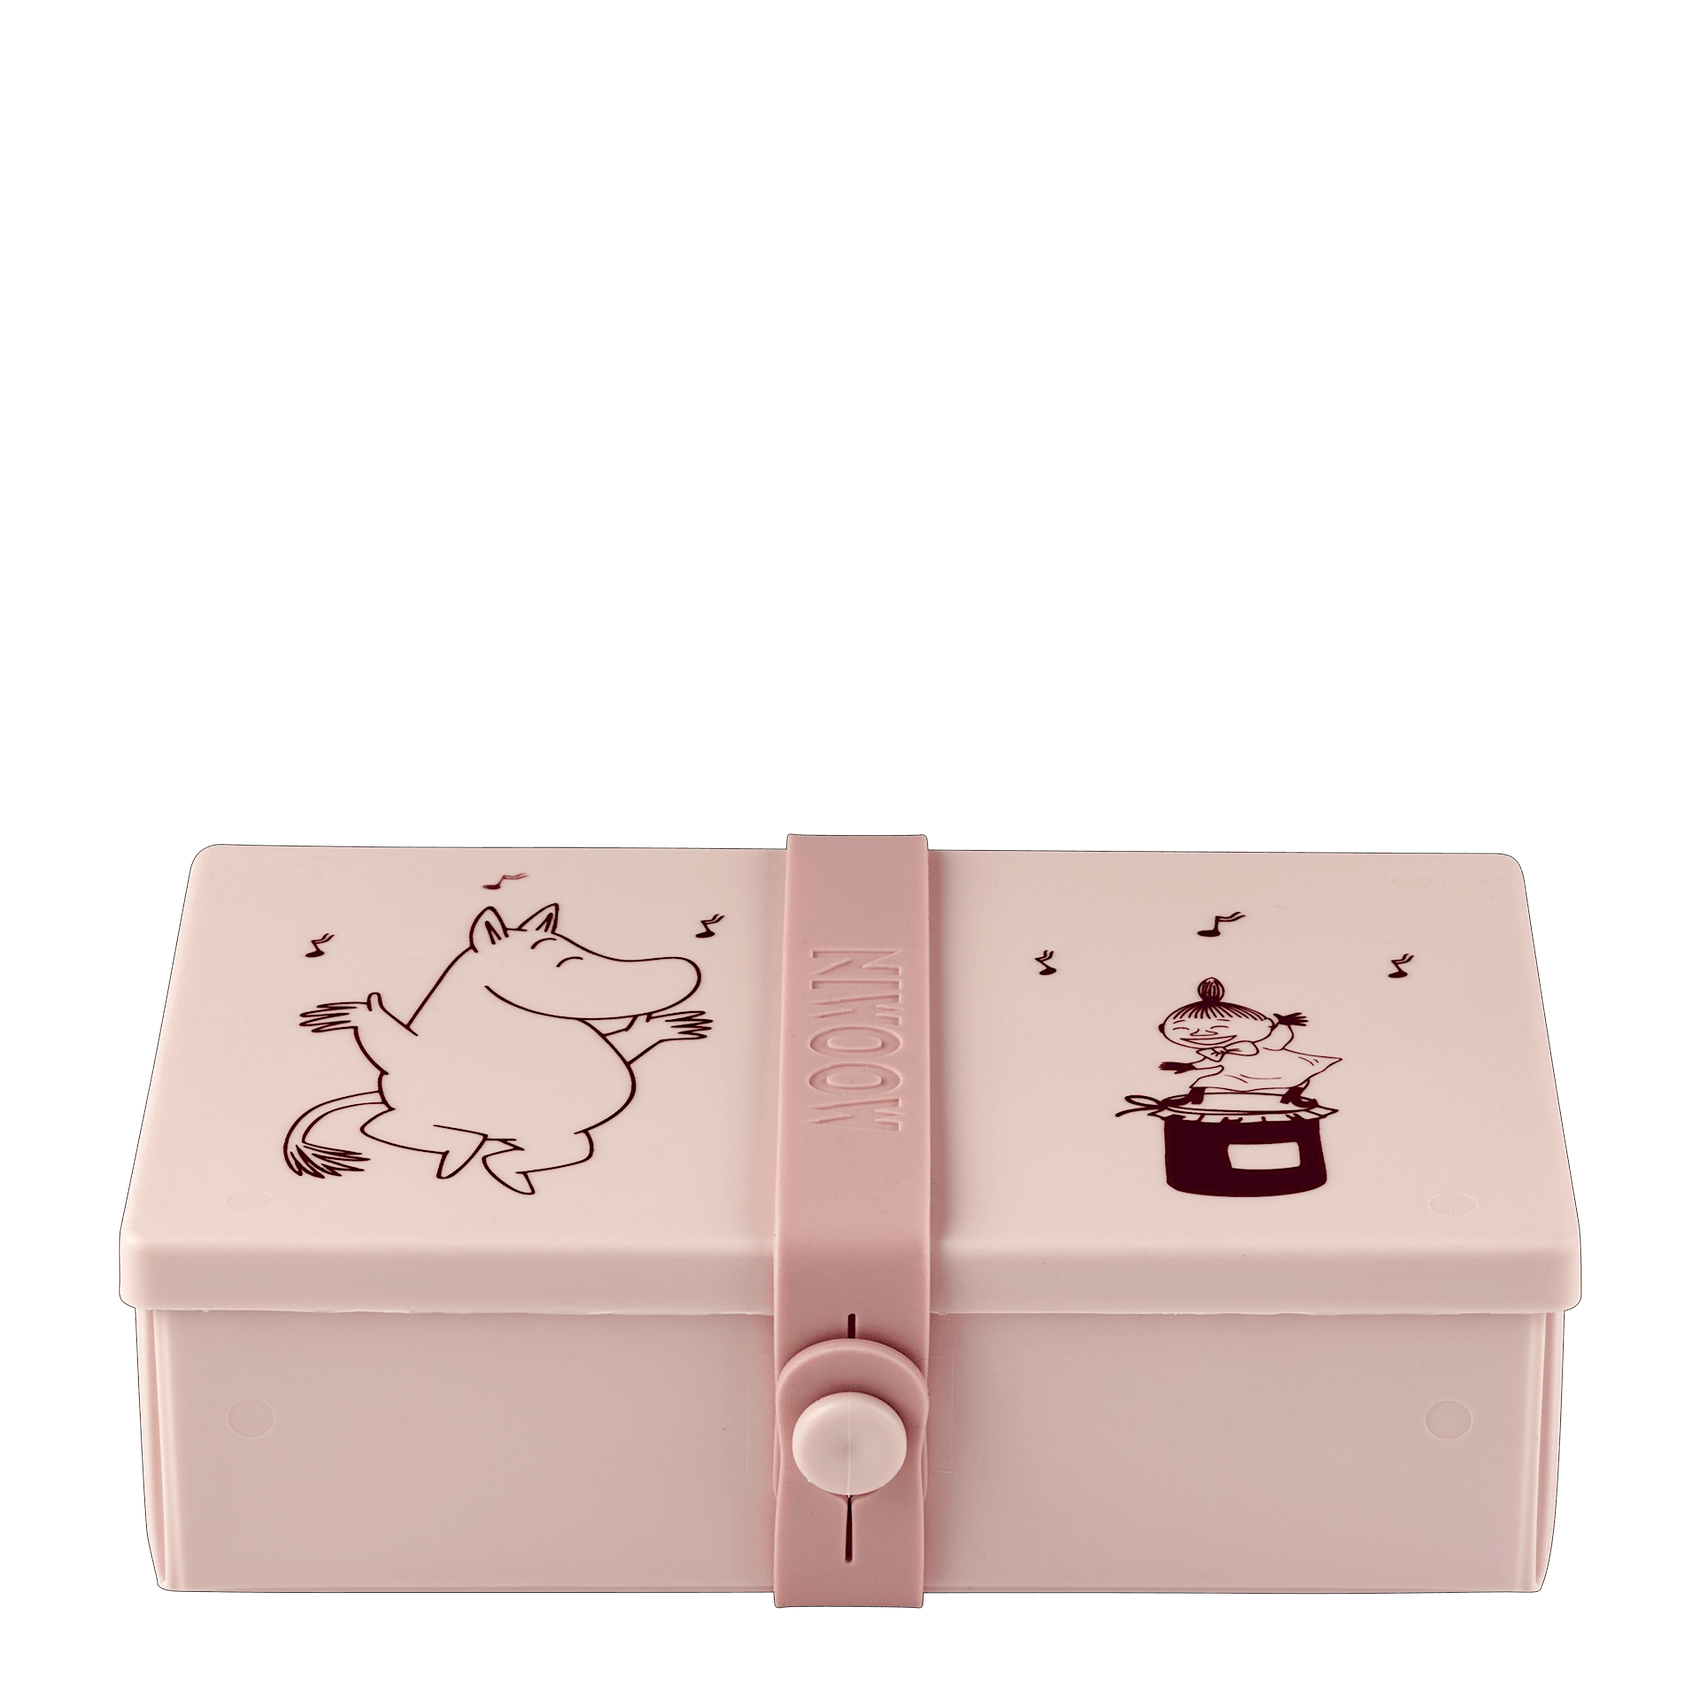 The Moomins Lunch Box 01, rectangular, delicate pink